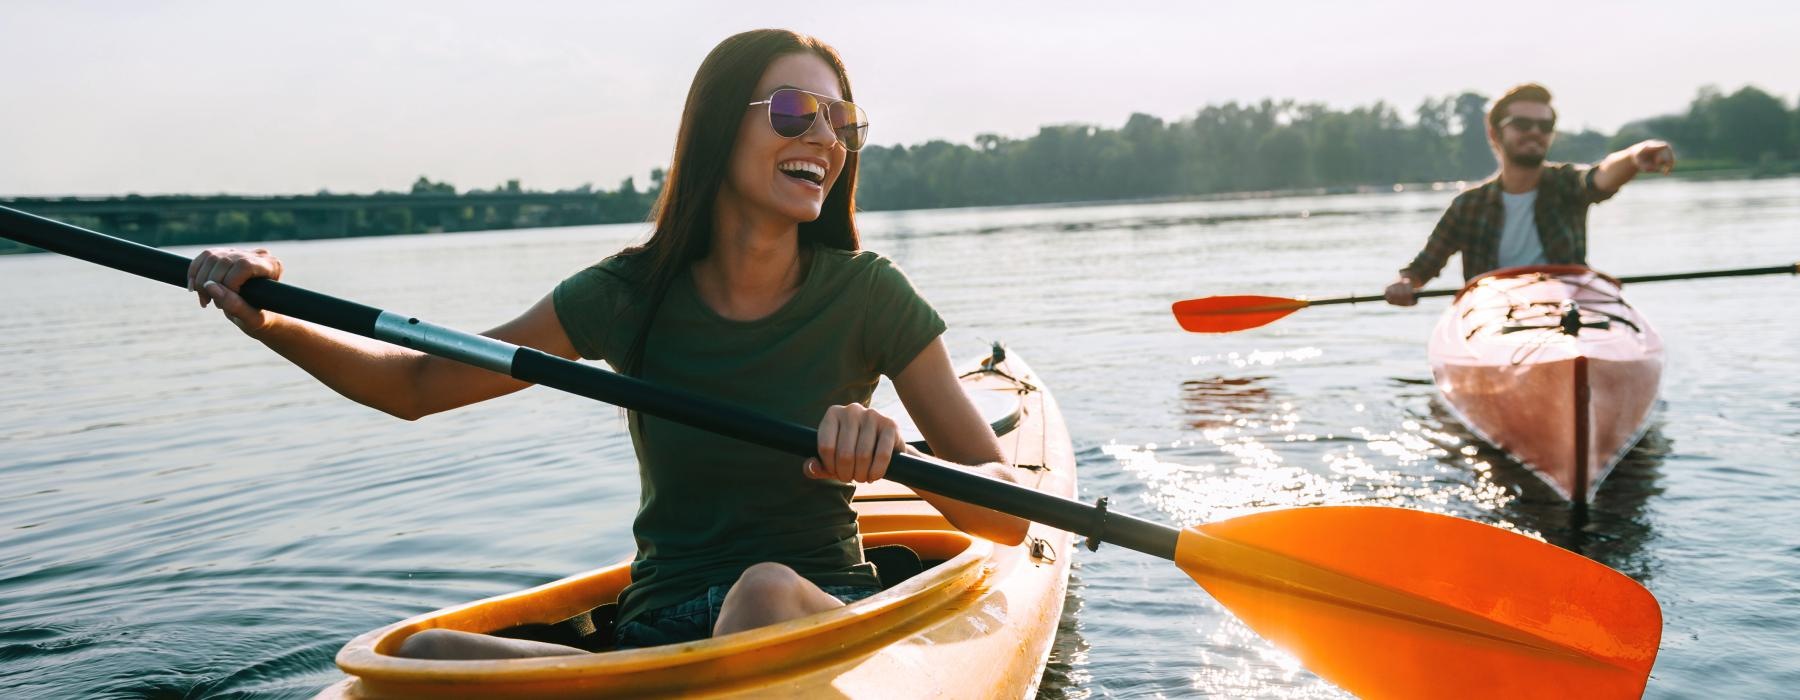 a smiling woman in a kayak